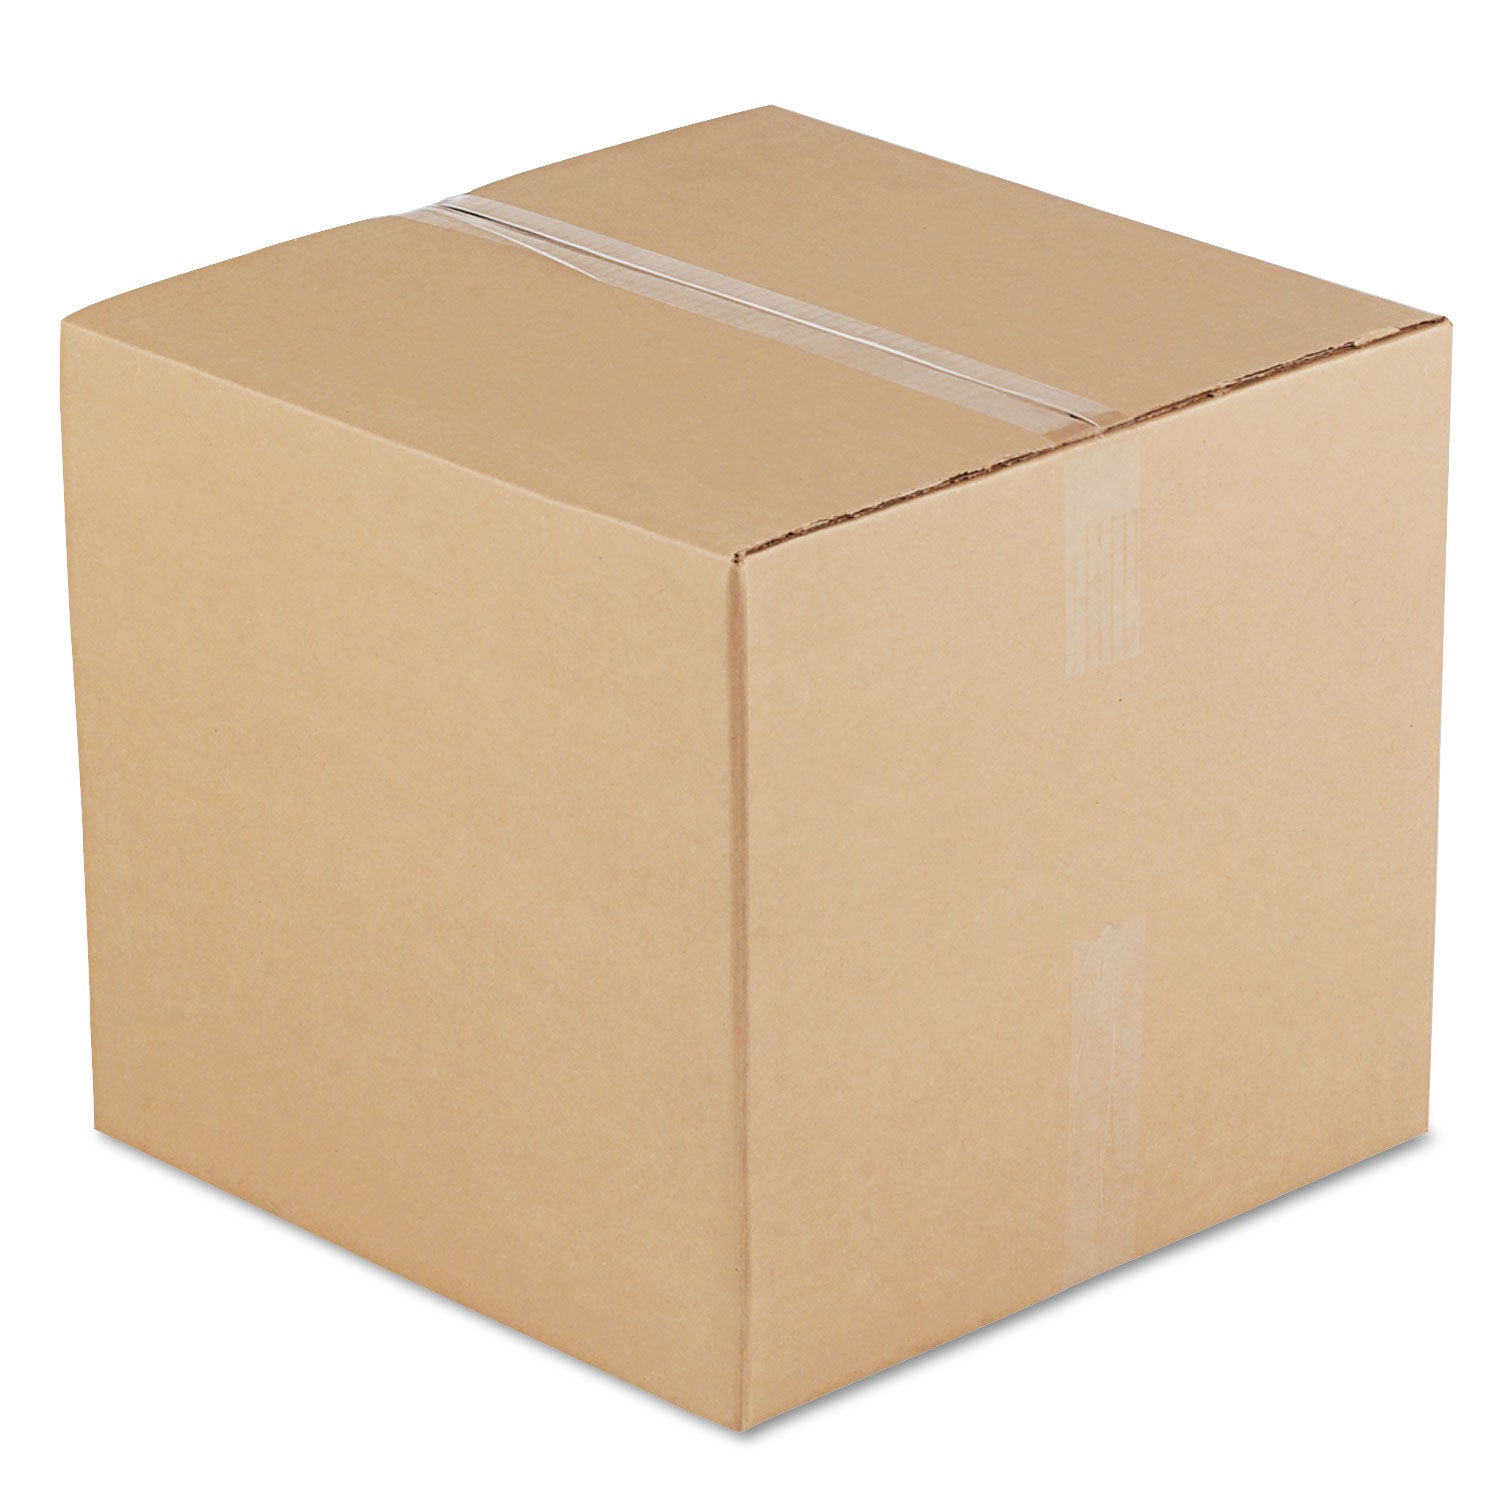 fixed-depth-corrugated-shipping-boxes-regular-slotted-container-rsc-18-x-18-x-16-brown-kraft-15-bundle_unv181816 - 3